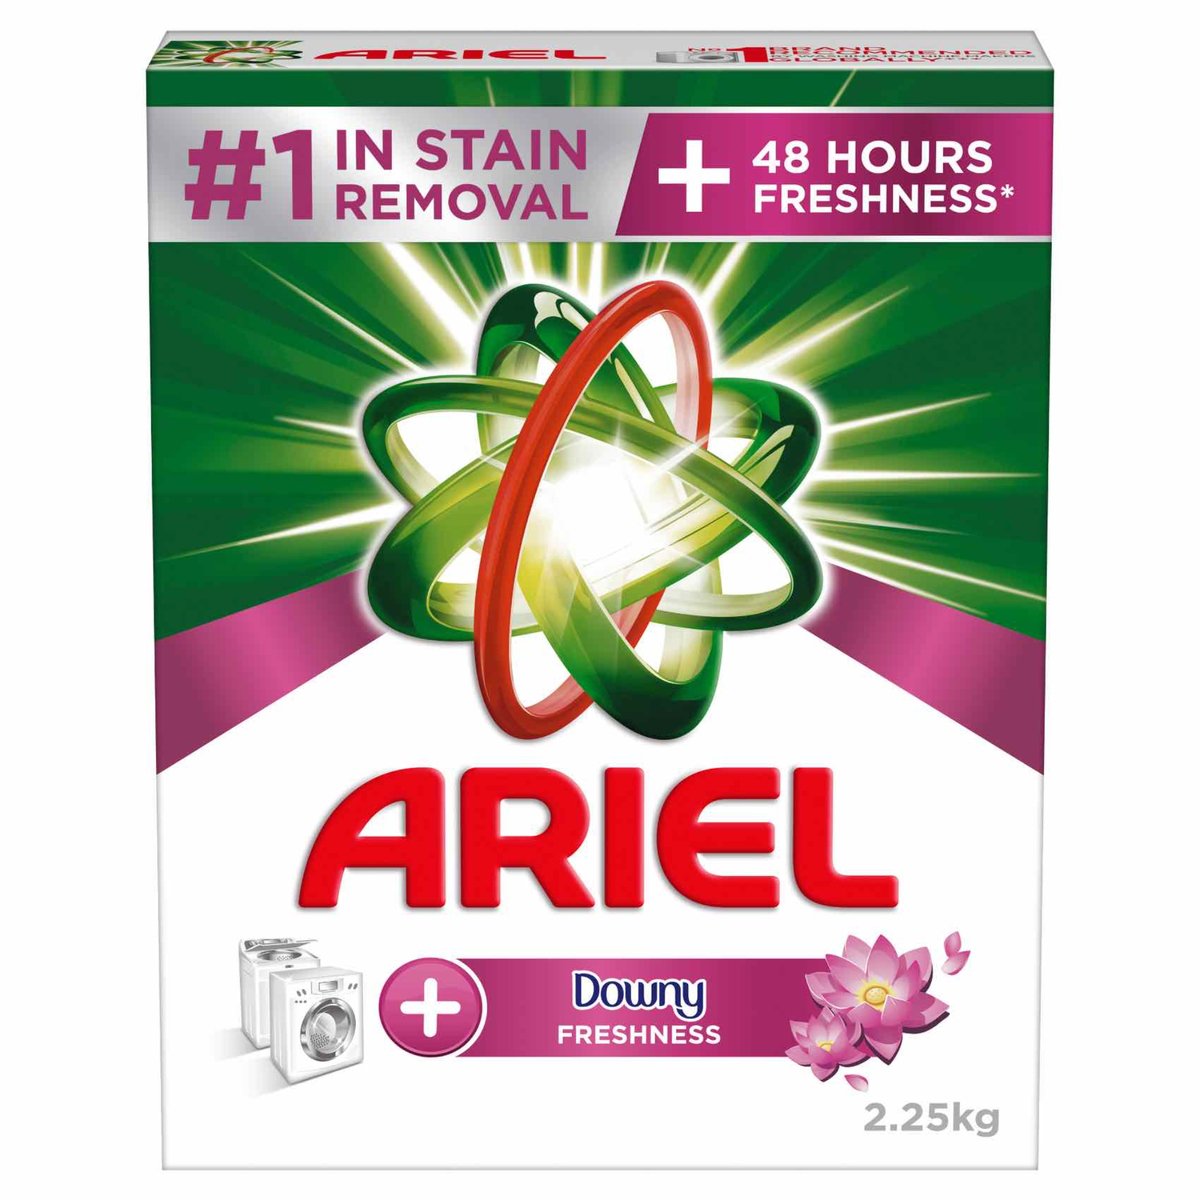 Ariel Automatic Downy Fresh Laundry Detergent Powder, Number 1 in Stain Removal with 48 Hours of Freshness, 2.25 kg